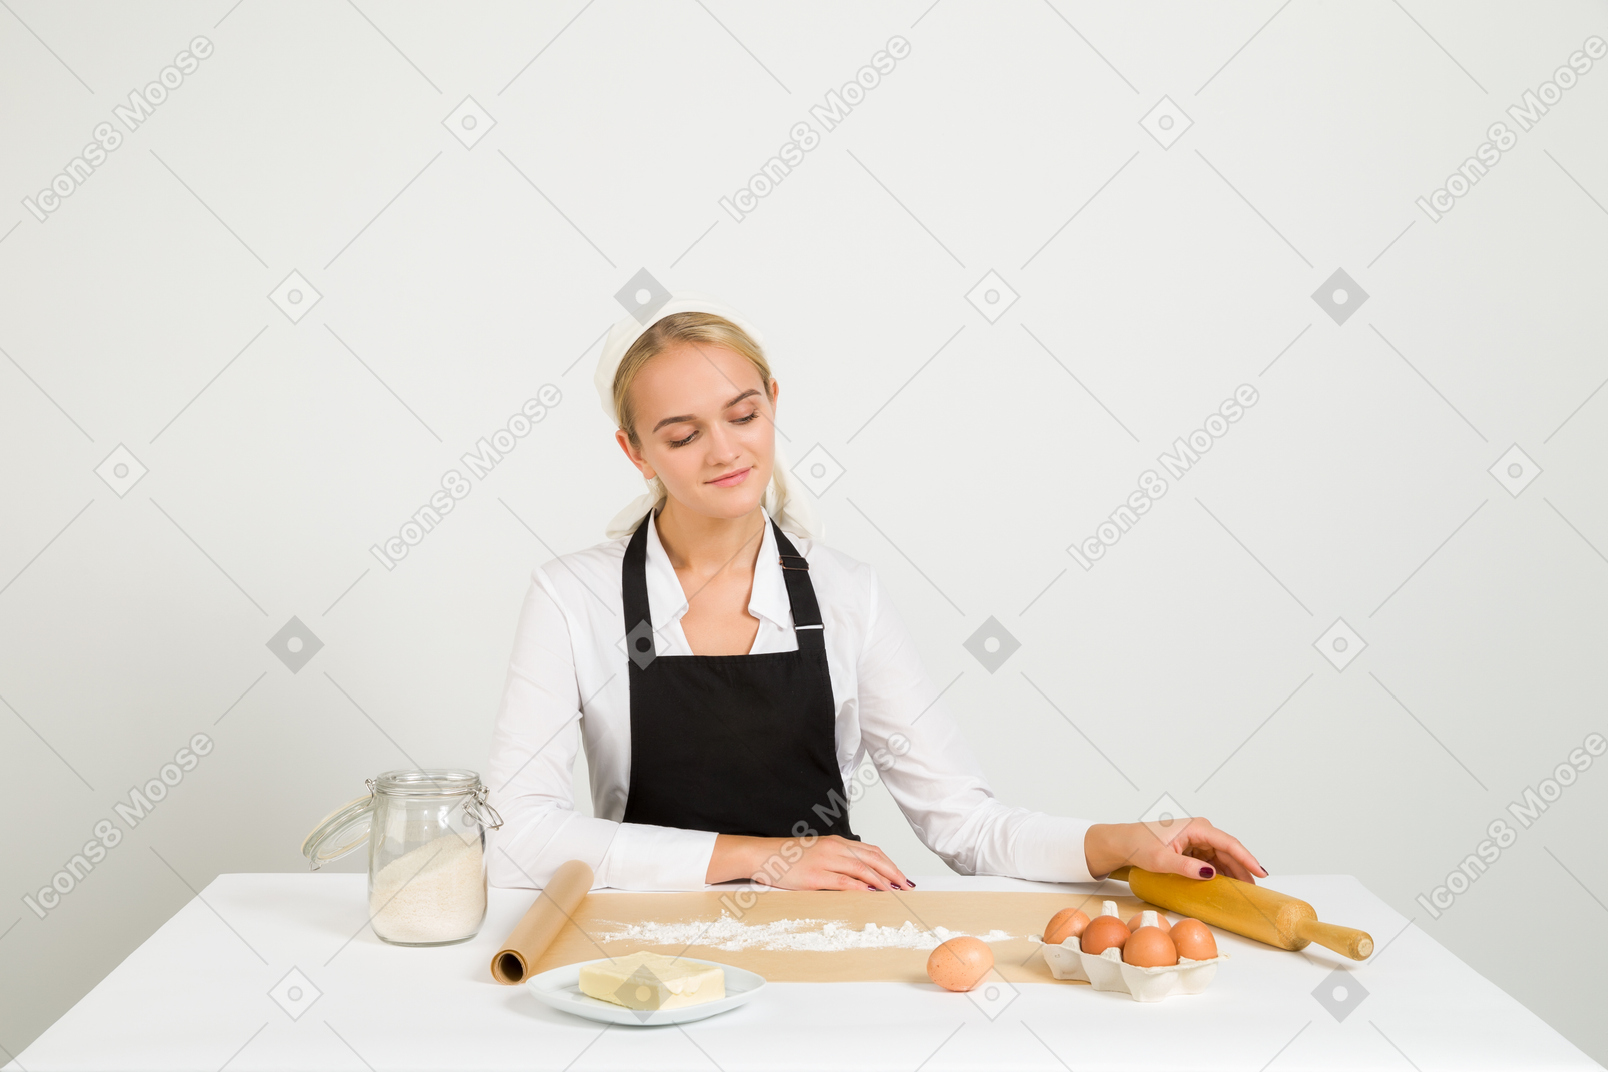 Female chef sitting at the table with pastry ingredients on it